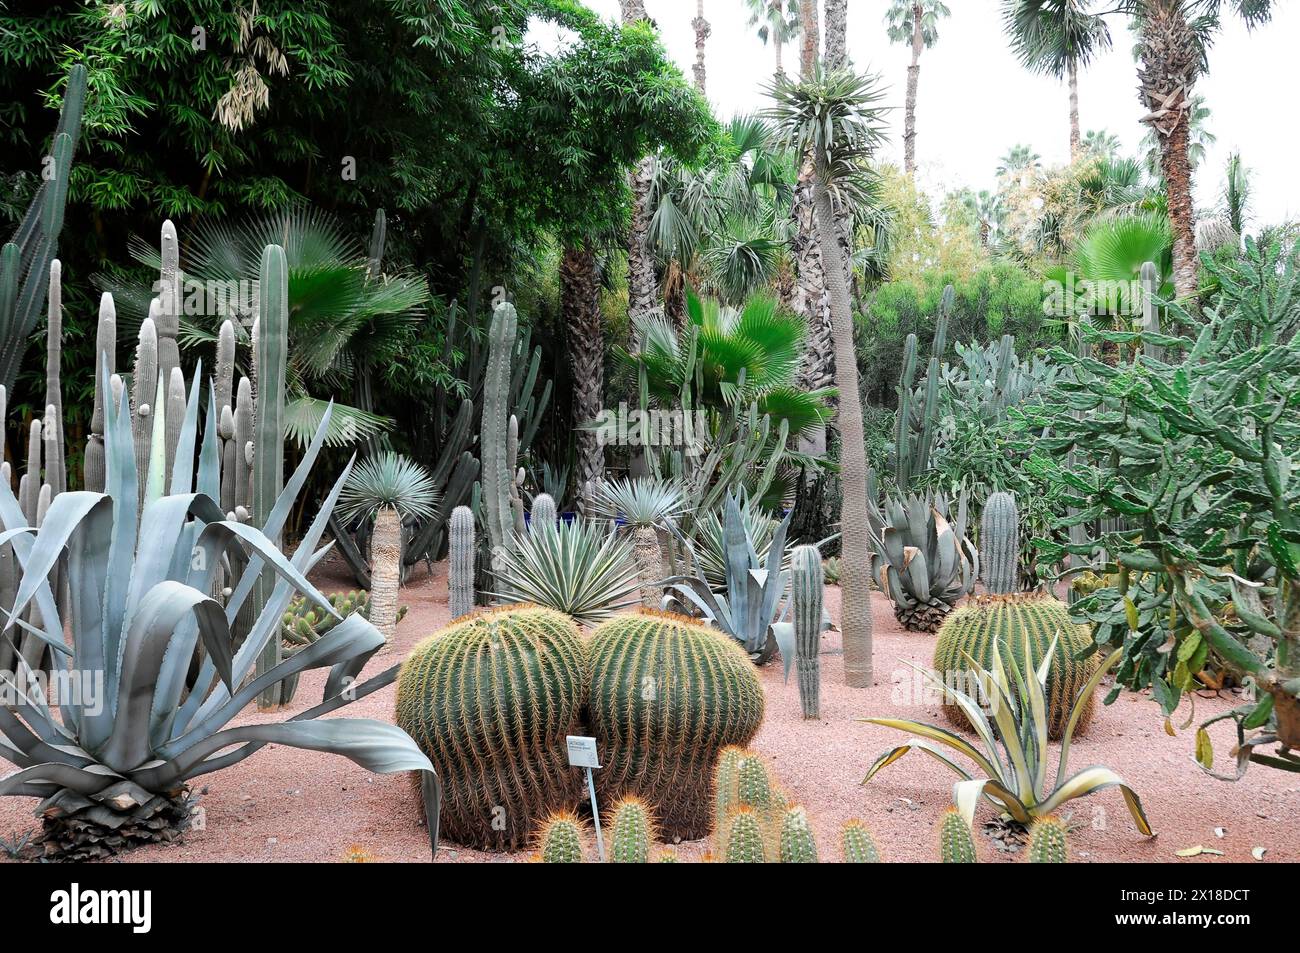 Jardin Majorelle, botanical garden in Marrakech, diverse cactus garden with a wide variety of species and shapes, Marrakech, Morocco Stock Photo